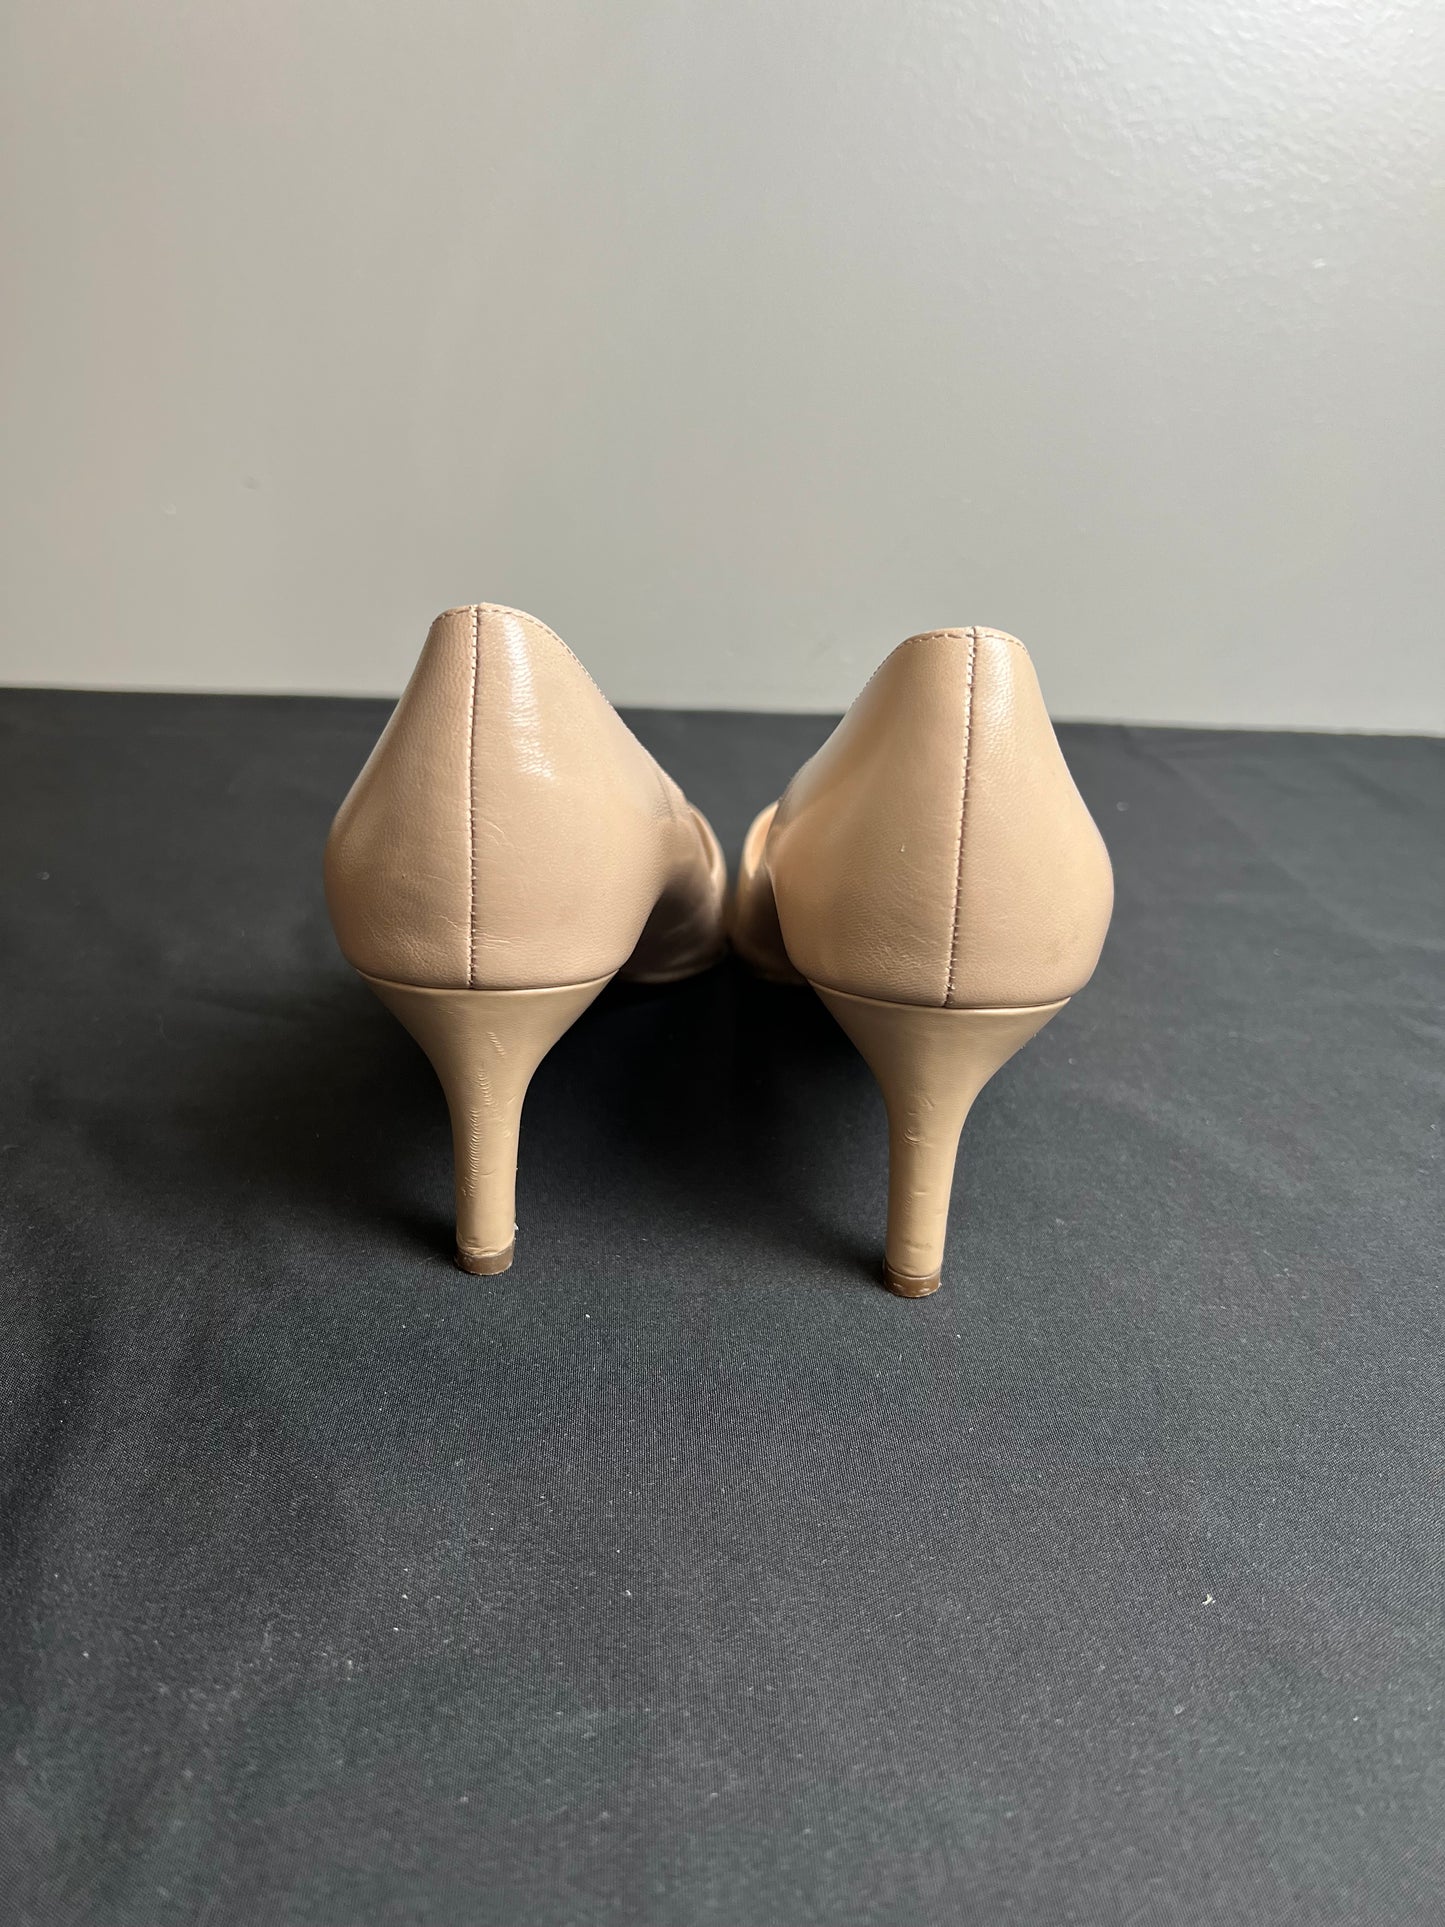 Shoes Heels Stiletto By Franco Sarto  Size: 8.5